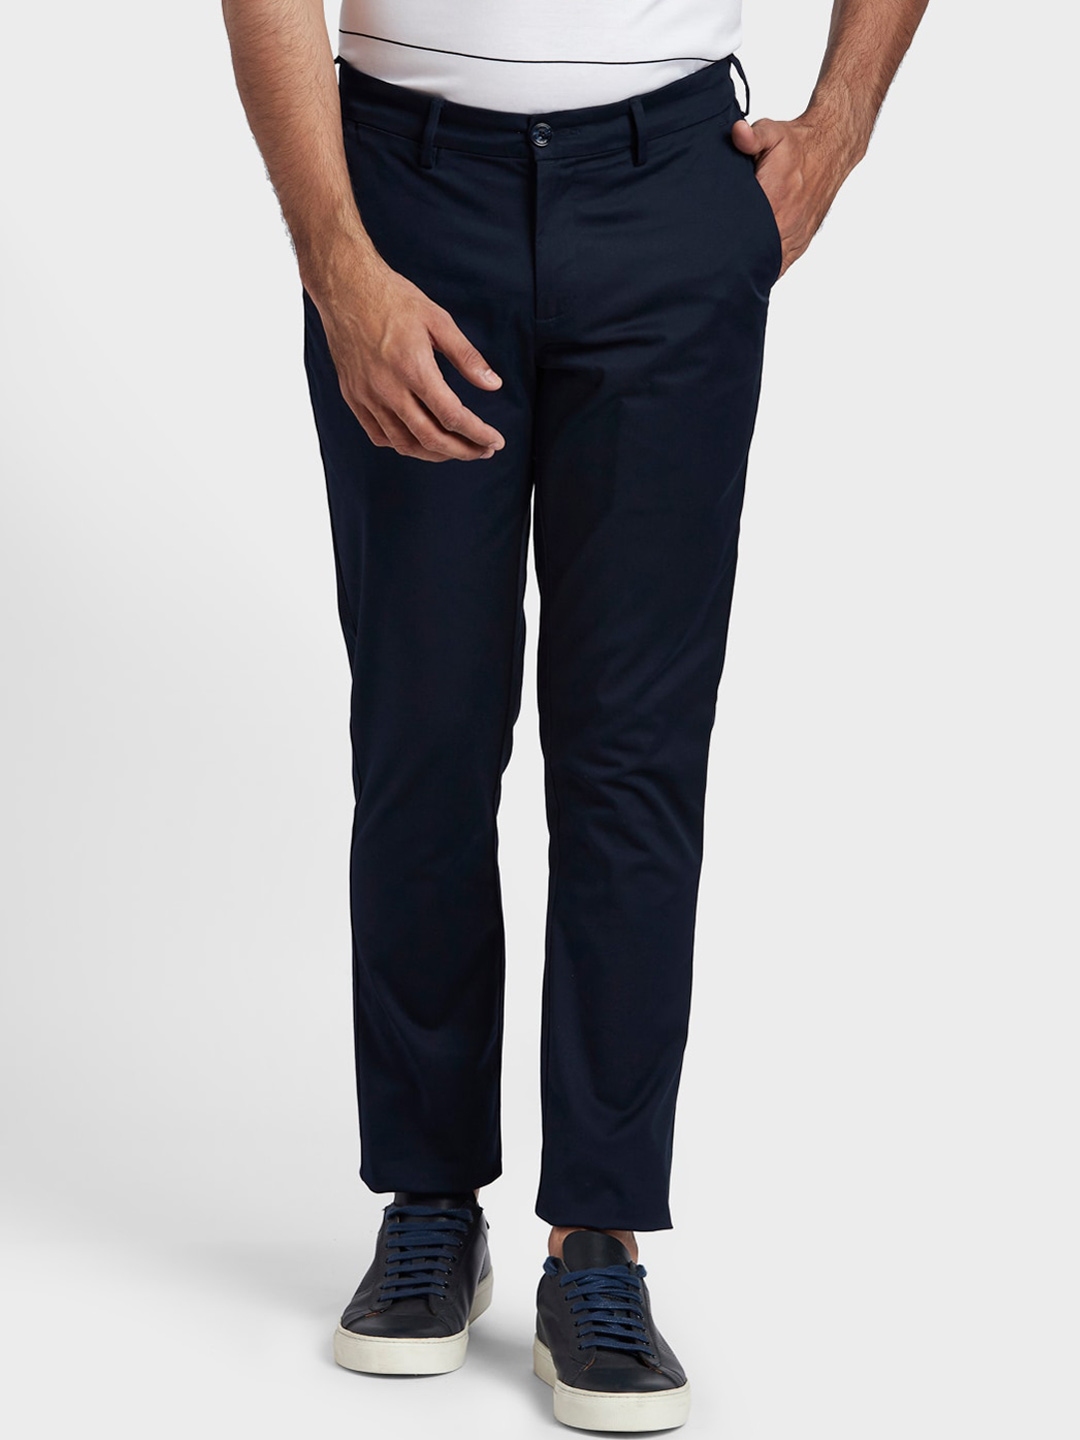 Buy ColorPlus Men Blue Chinos Trousers - Trousers for Men 15460688 | Myntra